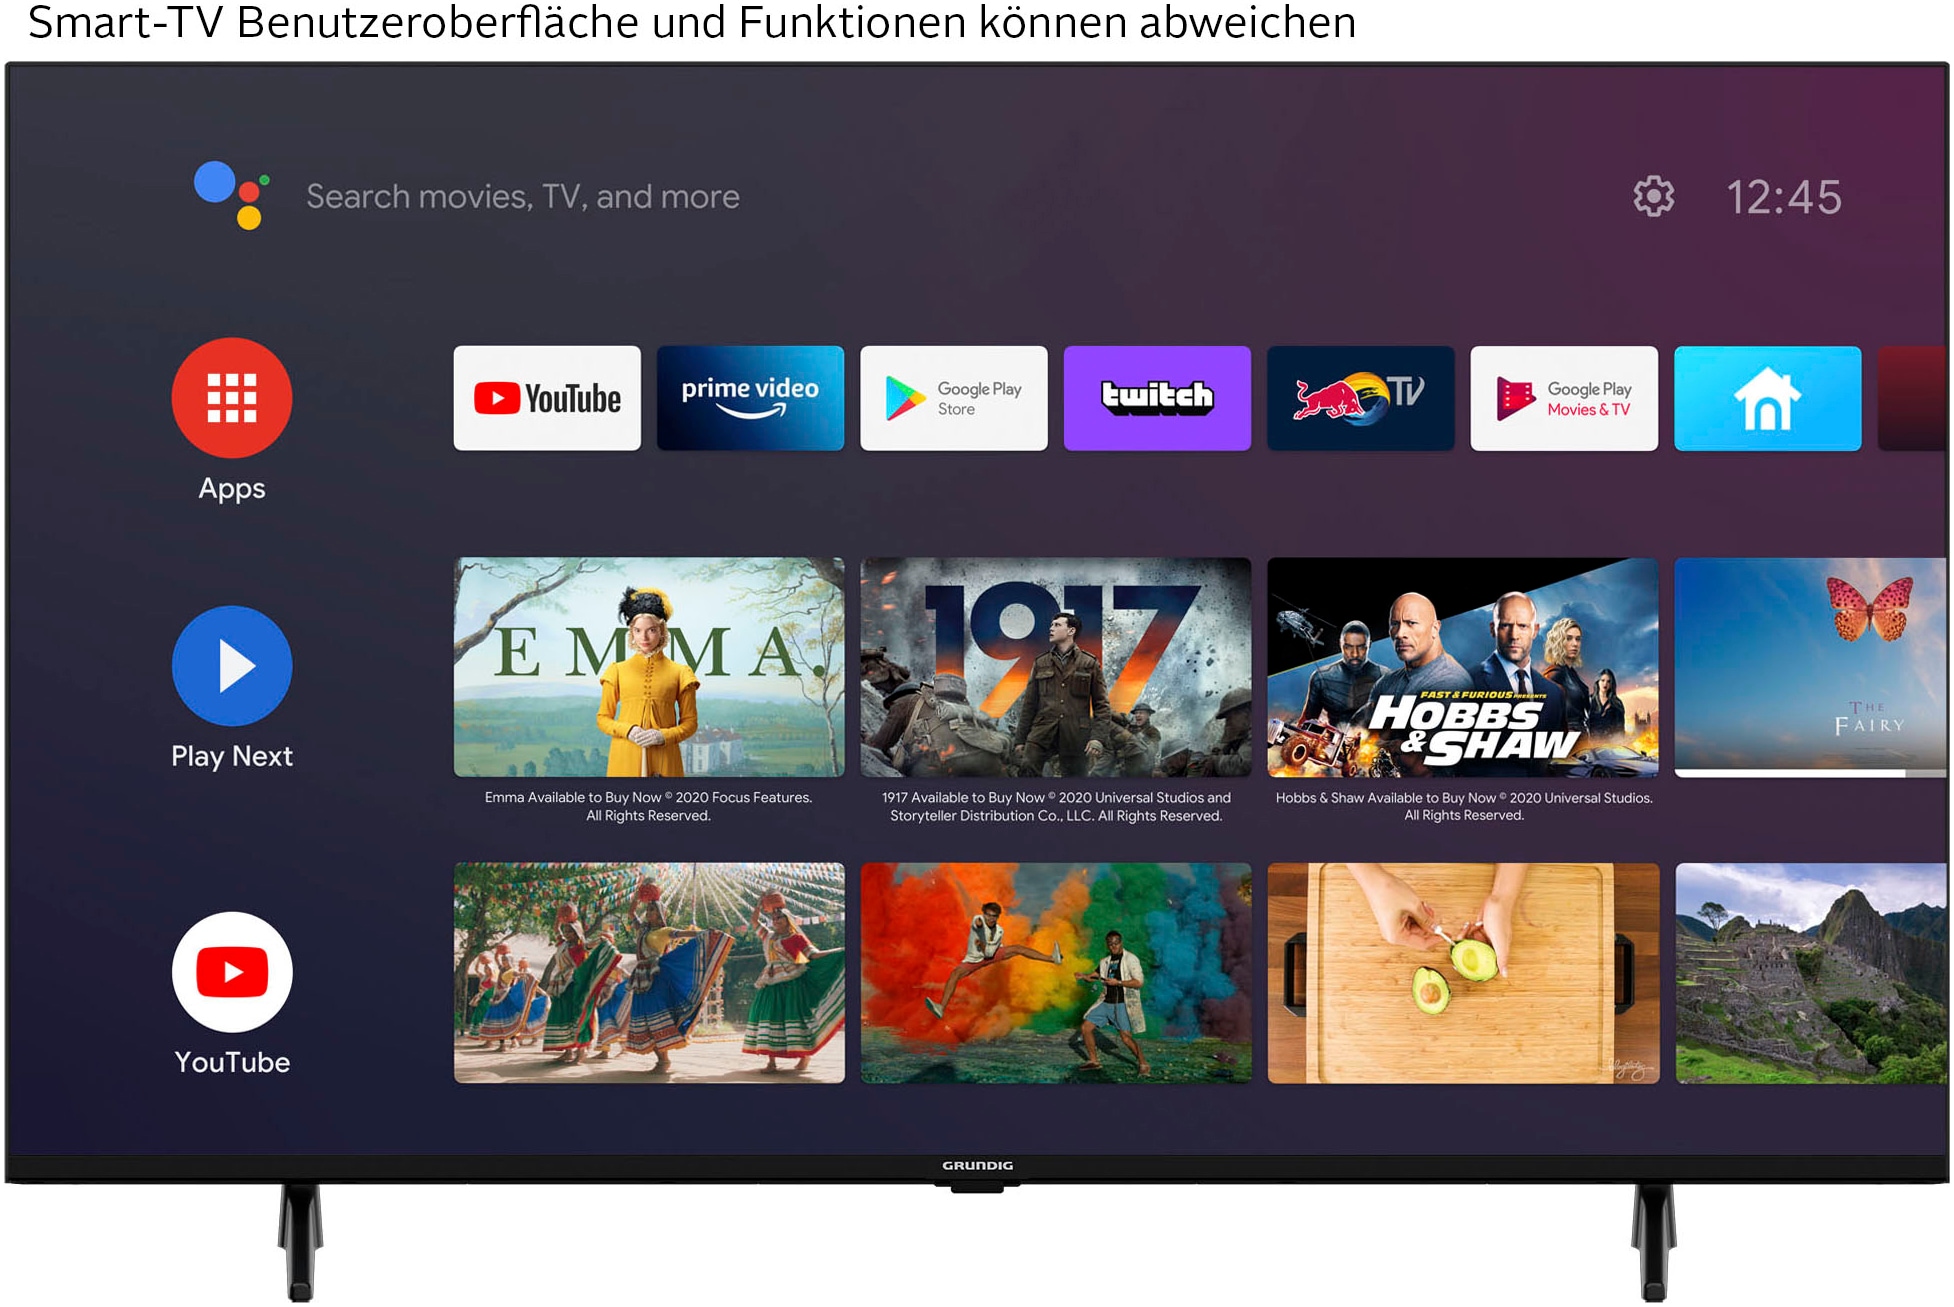 Grundig LED-Fernseher »43 VOE 73 AU5T00«, 108 cm/43 Zoll, 4K Ultra HD, Android TV